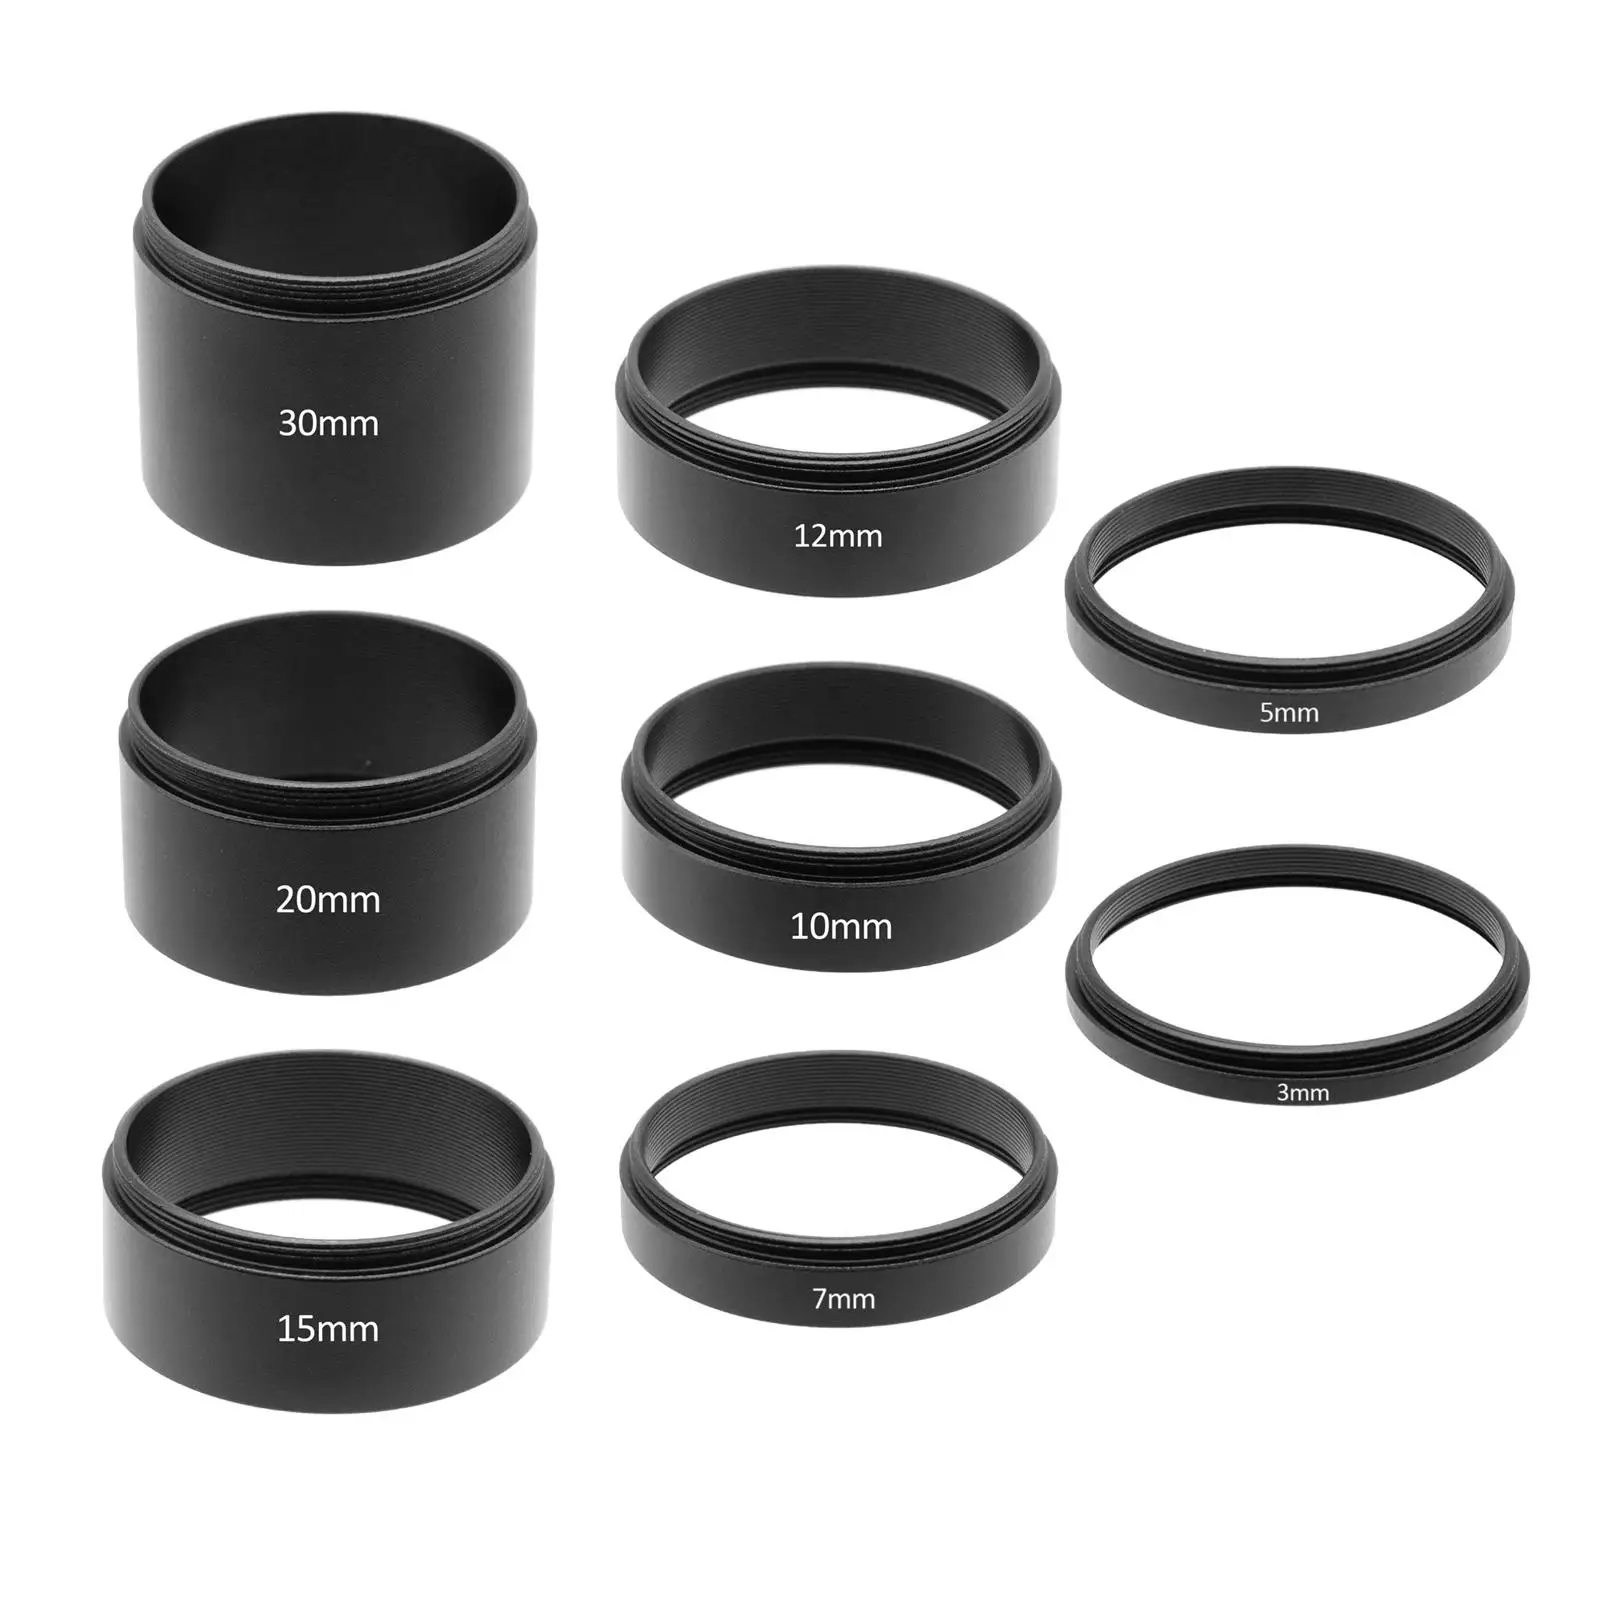 T2 Extension Tube Photography Accs M42x0.75 Thread Easy to Install Supplies Premium Wide T2 Thread Extension Tube for Slr Camera